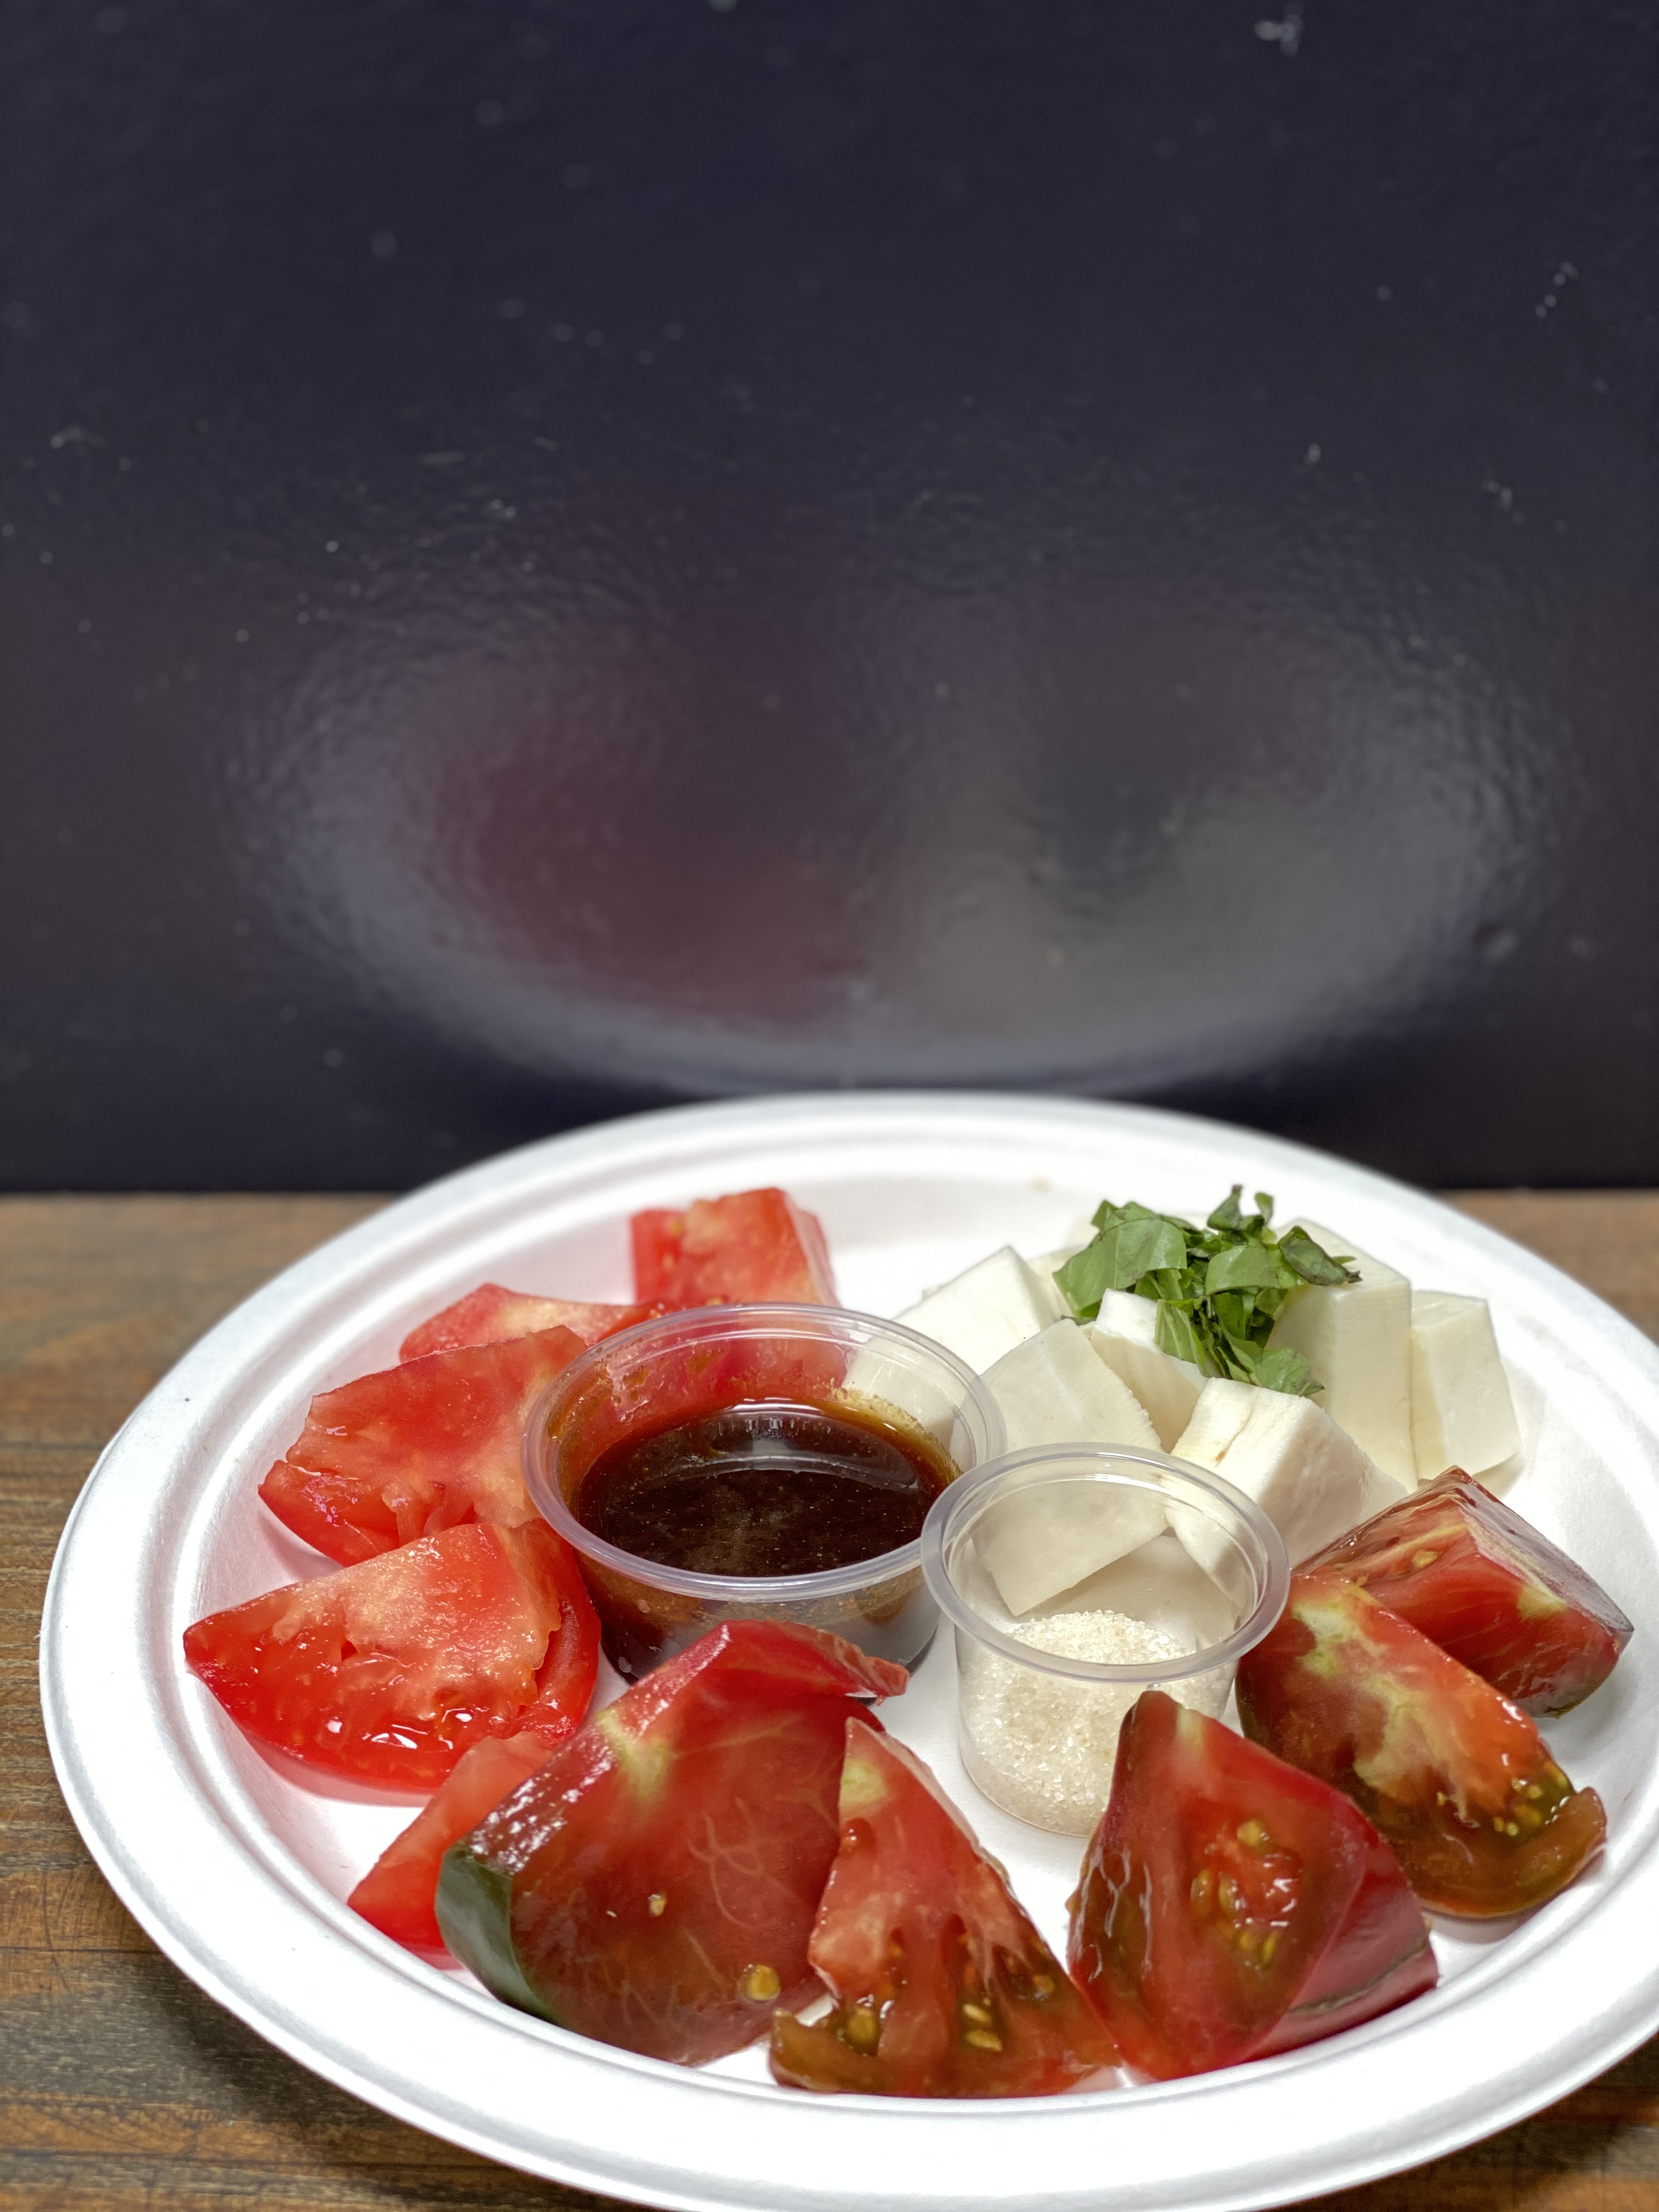 Wedges of juicy red heirloom tomatoes and cubes of mozzarella on a plate, with small tubs of sugar and soy sauce glaze for dipping